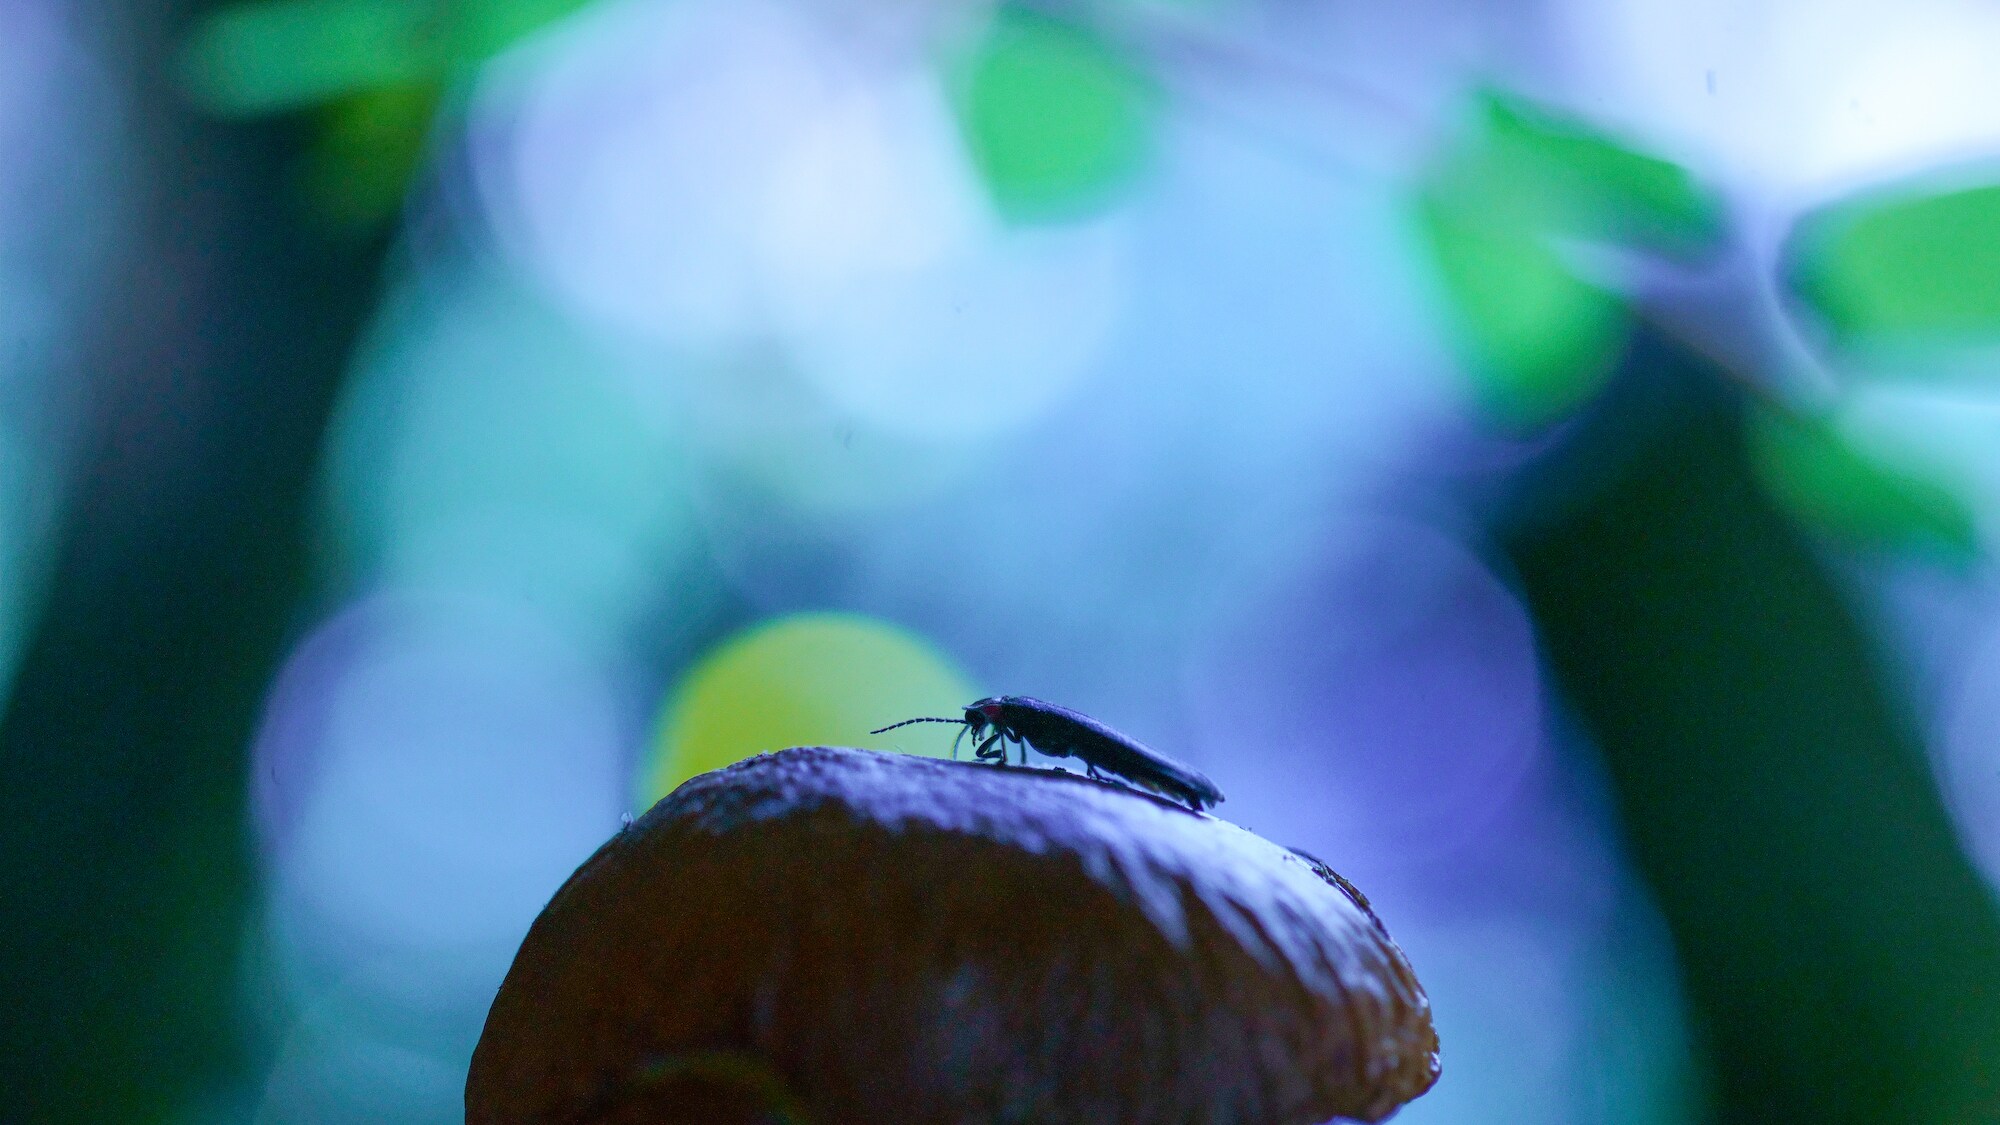 Fireflies on Fungus in the darkness of the Comite Ejecutiivo De Piedra Cante forest.  (National Geographic for Disney+/Alec Davy)